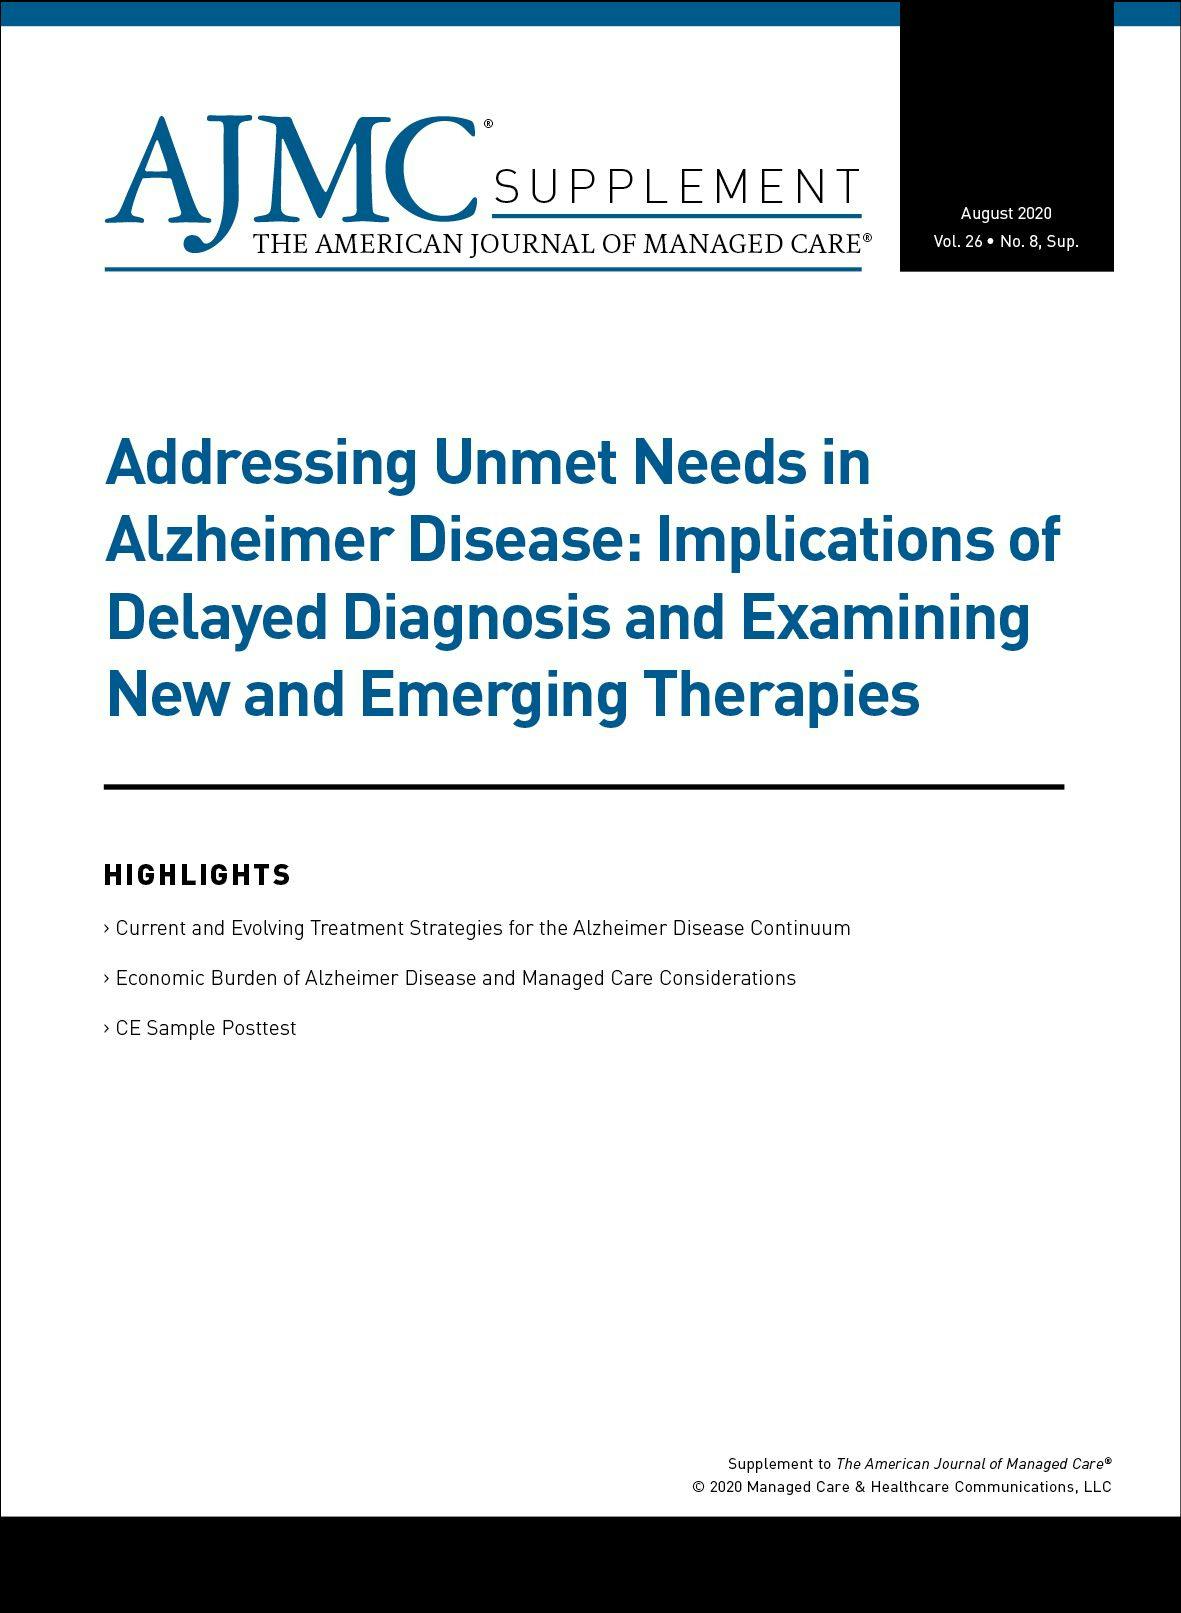 Addressing Unmet Needs in Alzheimer Disease: Implications of Delayed Diagnosis and Examining New and Emerging Therapies